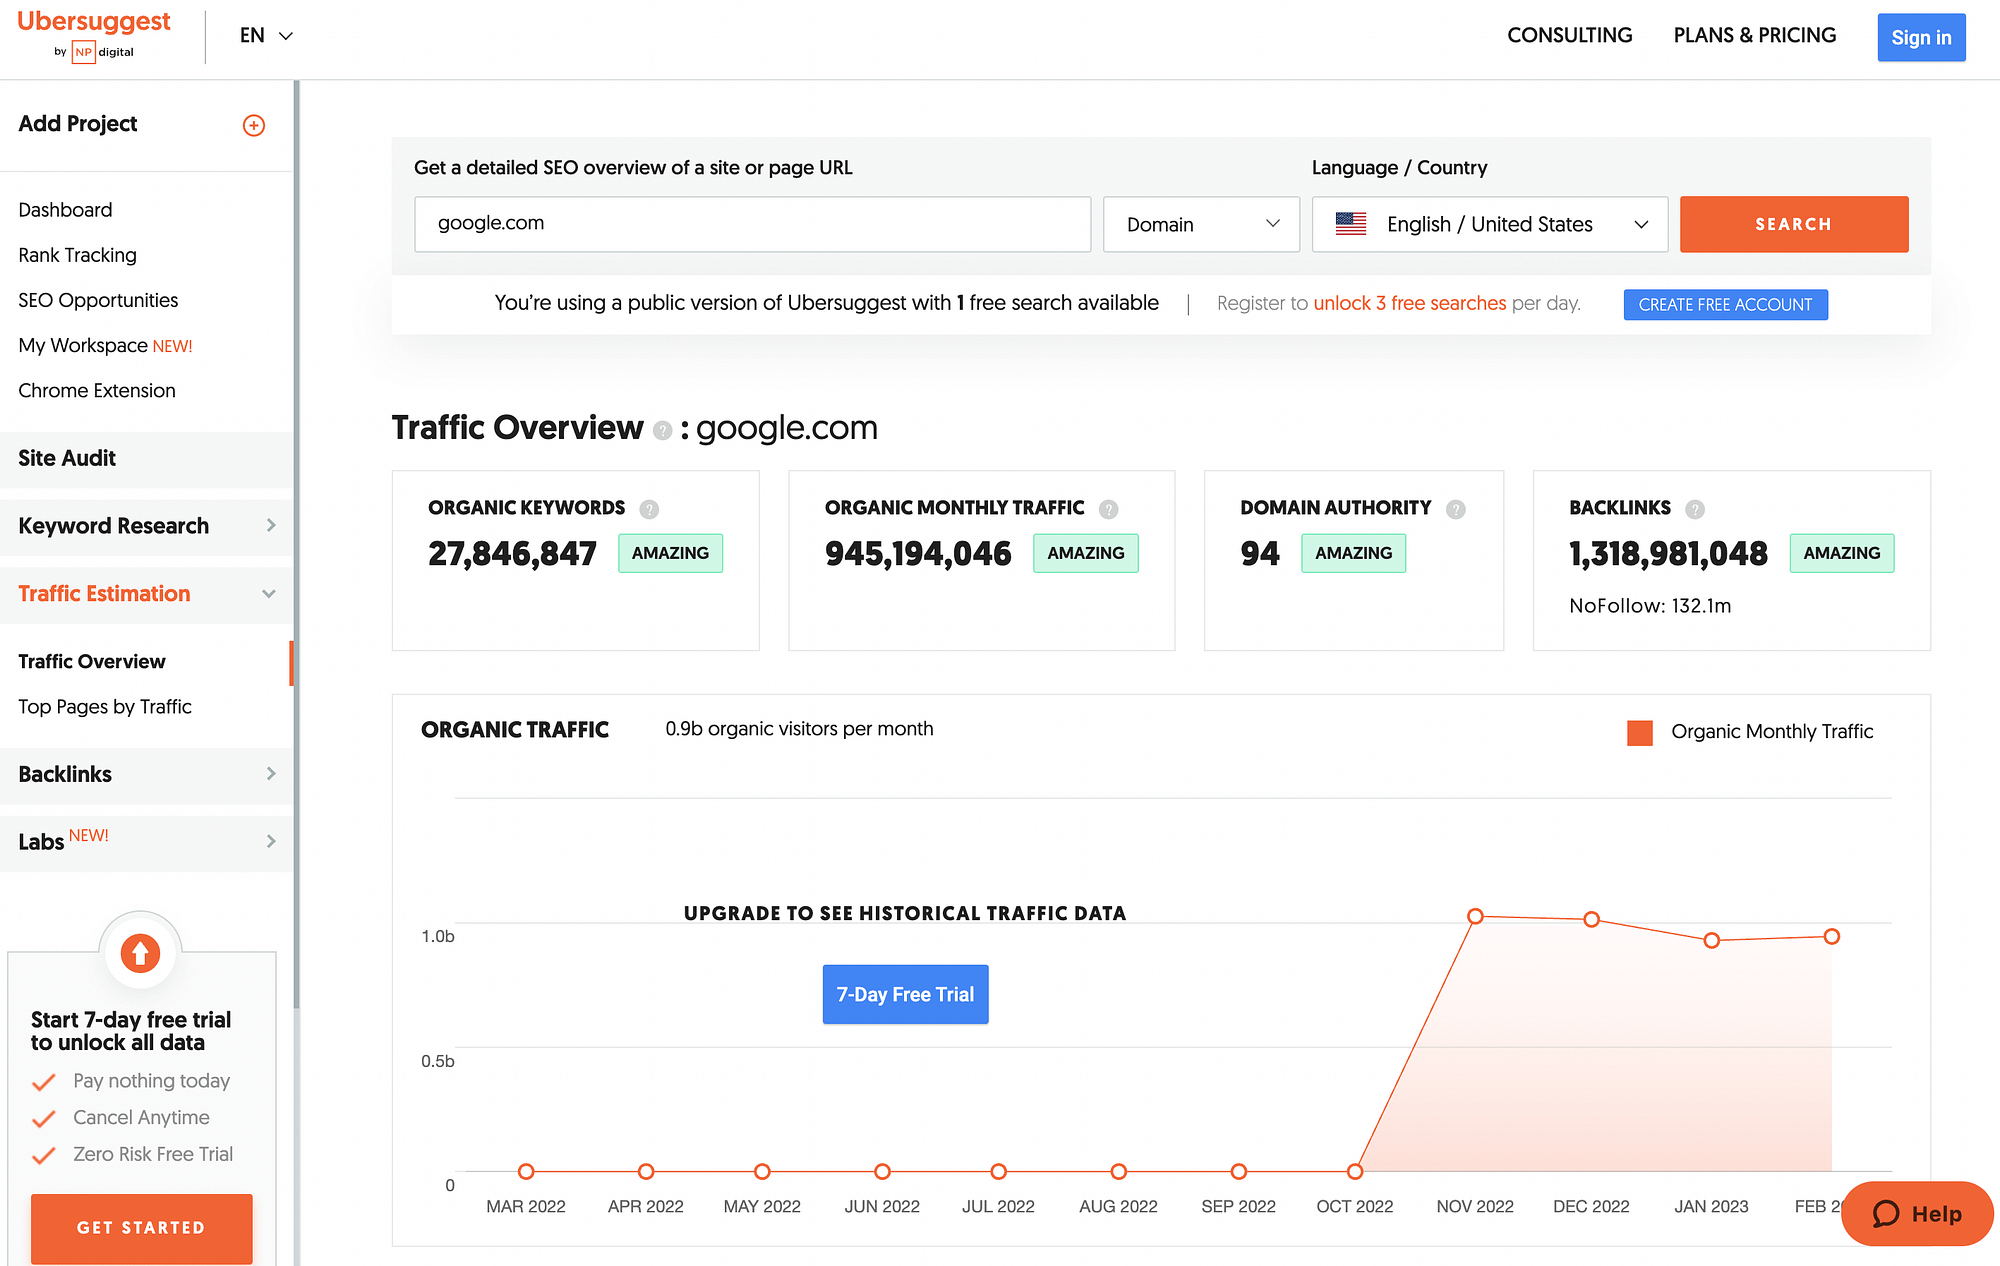 How to check website traffic with Ubersuggest